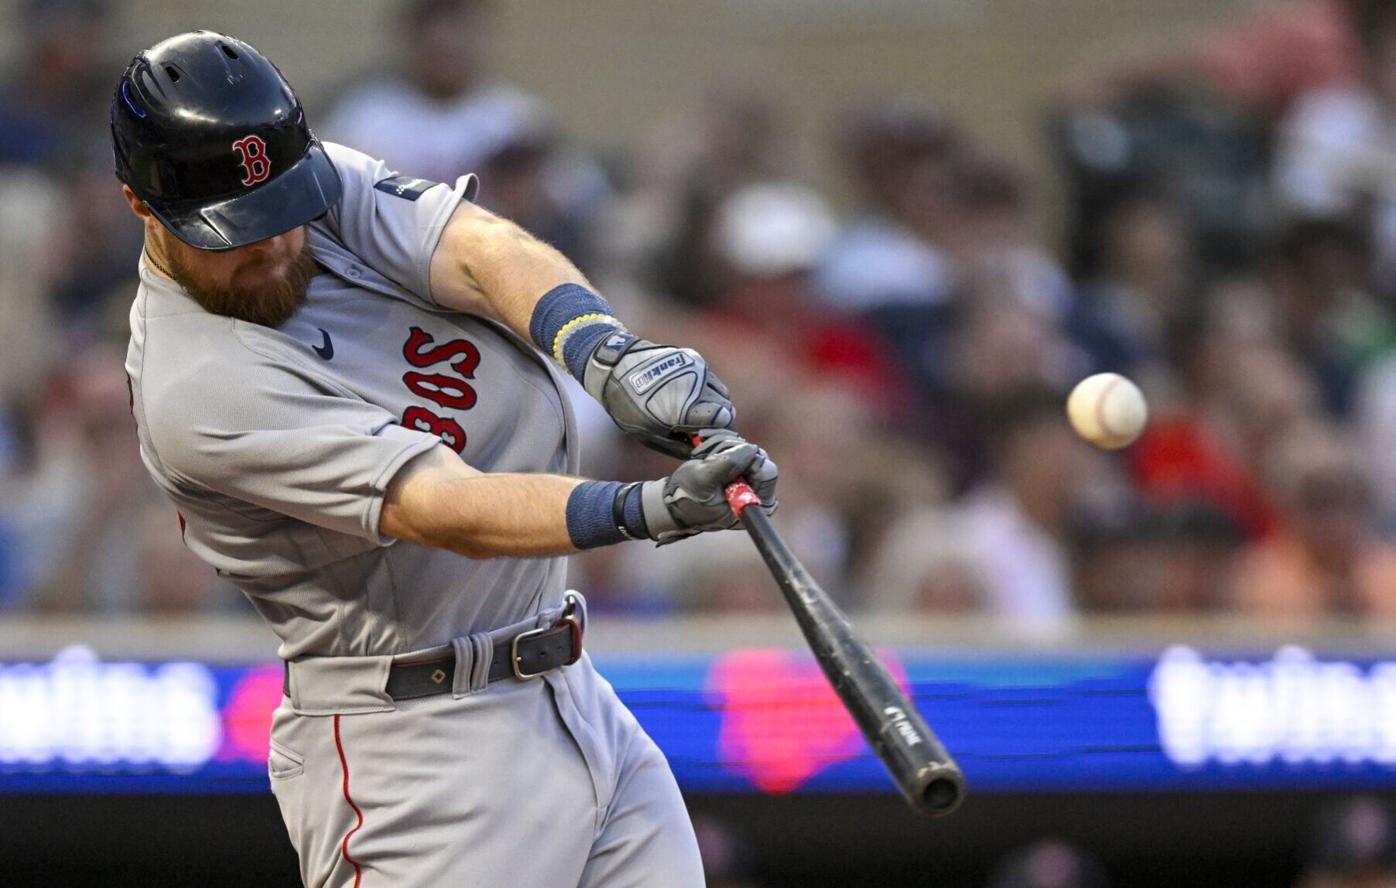 Adam Duvall's 3-run HR lifts Red Sox to 6-3 win over Tigers